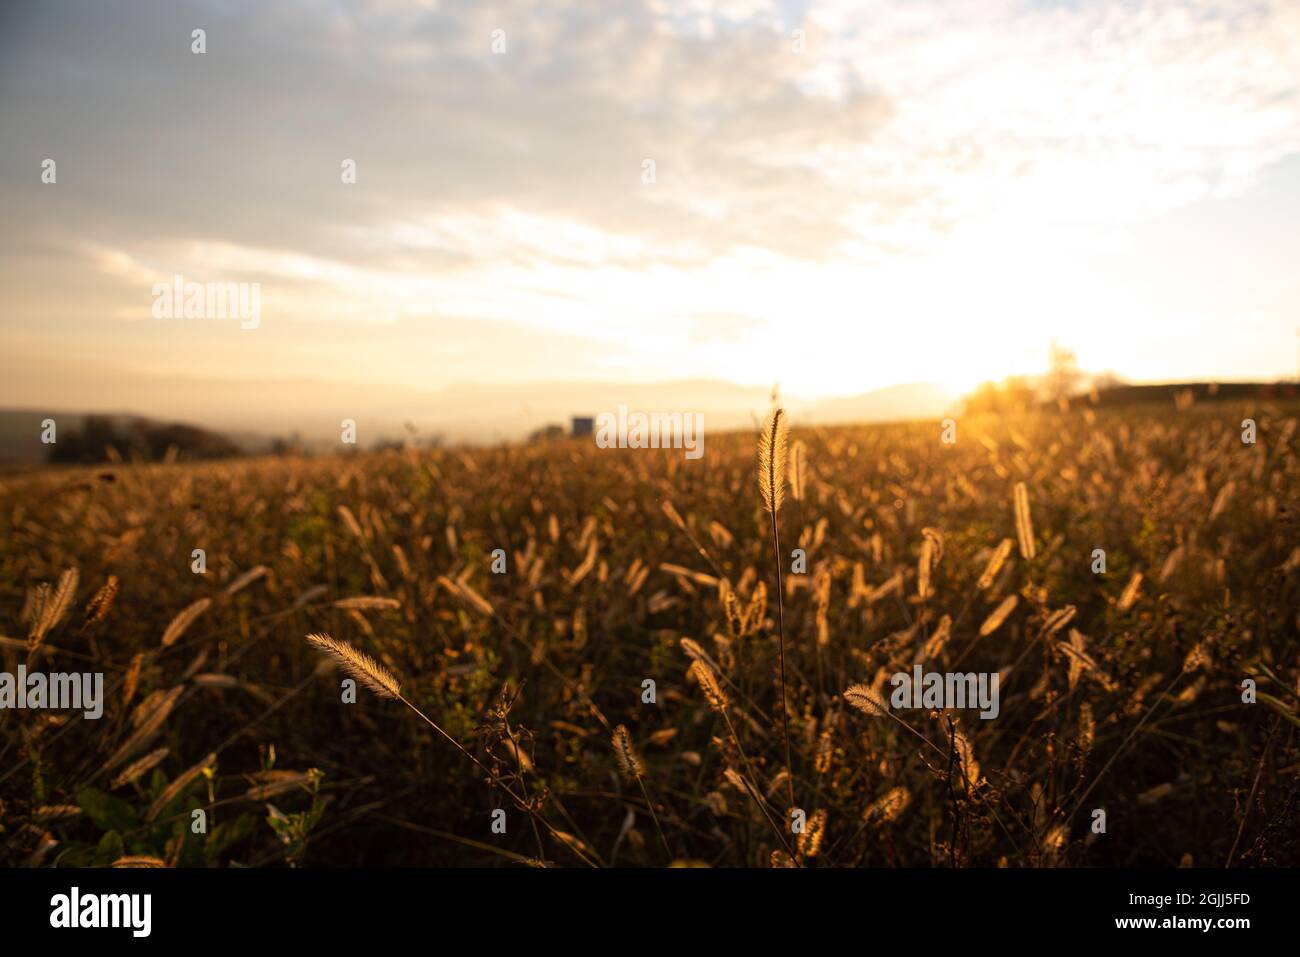 Field of wild grass against the autumn sky at sunset. Autumn landscape with warm colors of brown and gold. Selective focus, blurred background. Stock Photo